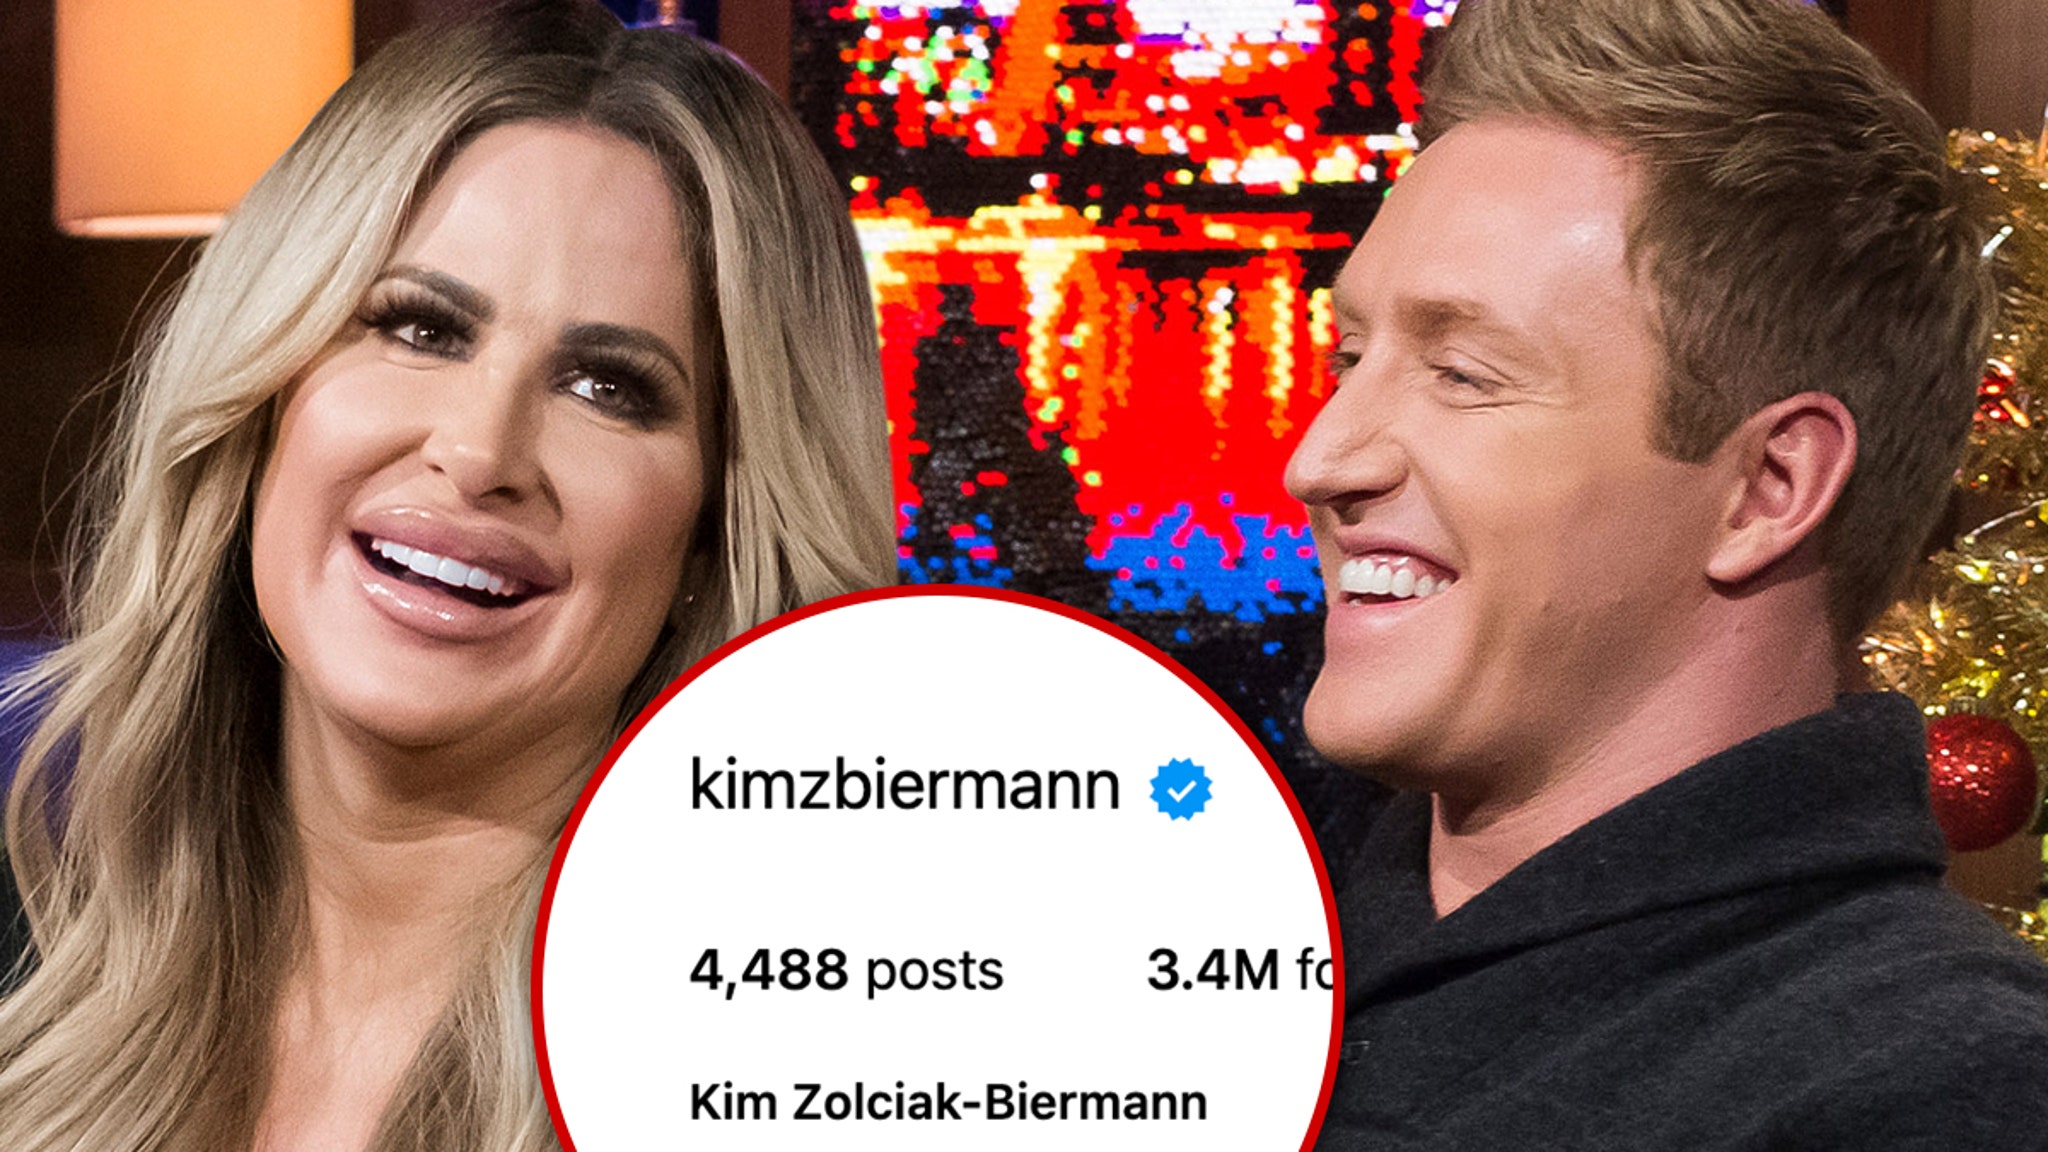 Kim Zolciak Changes Back to Married Name on IG Amid Divorce to Kroy Biermann